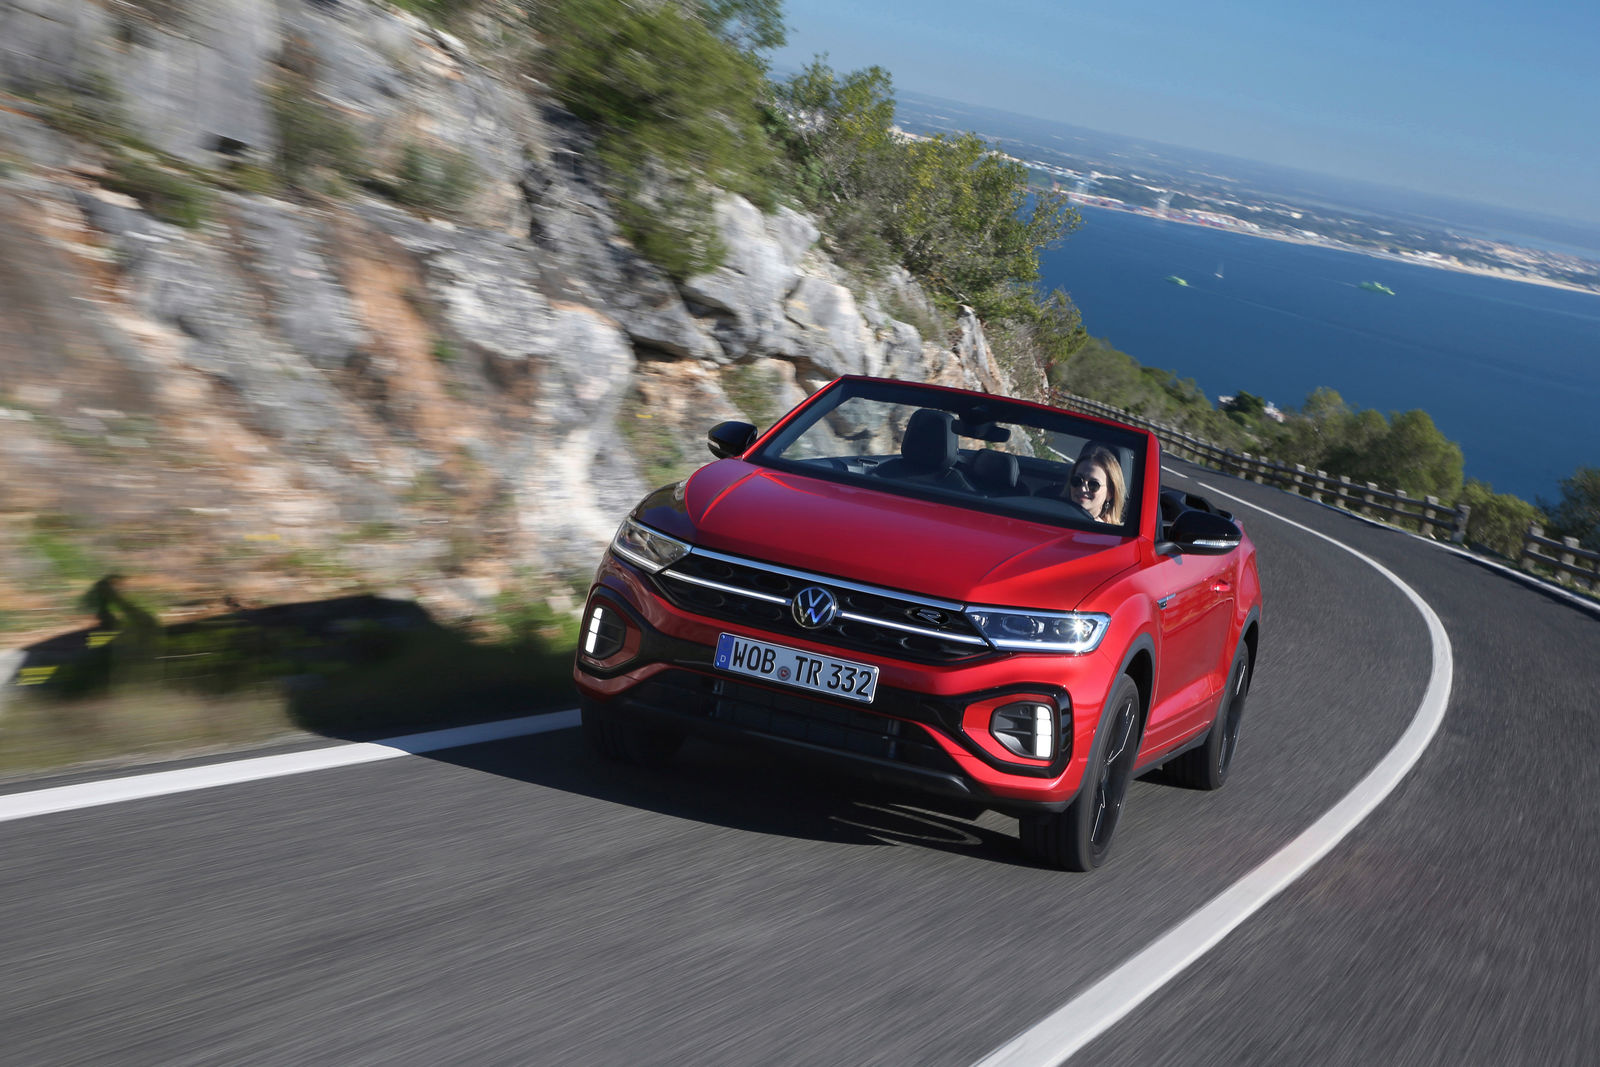 The new “Roc stars” among compact SUVs: T-Roc and T-Roc Cabriolet